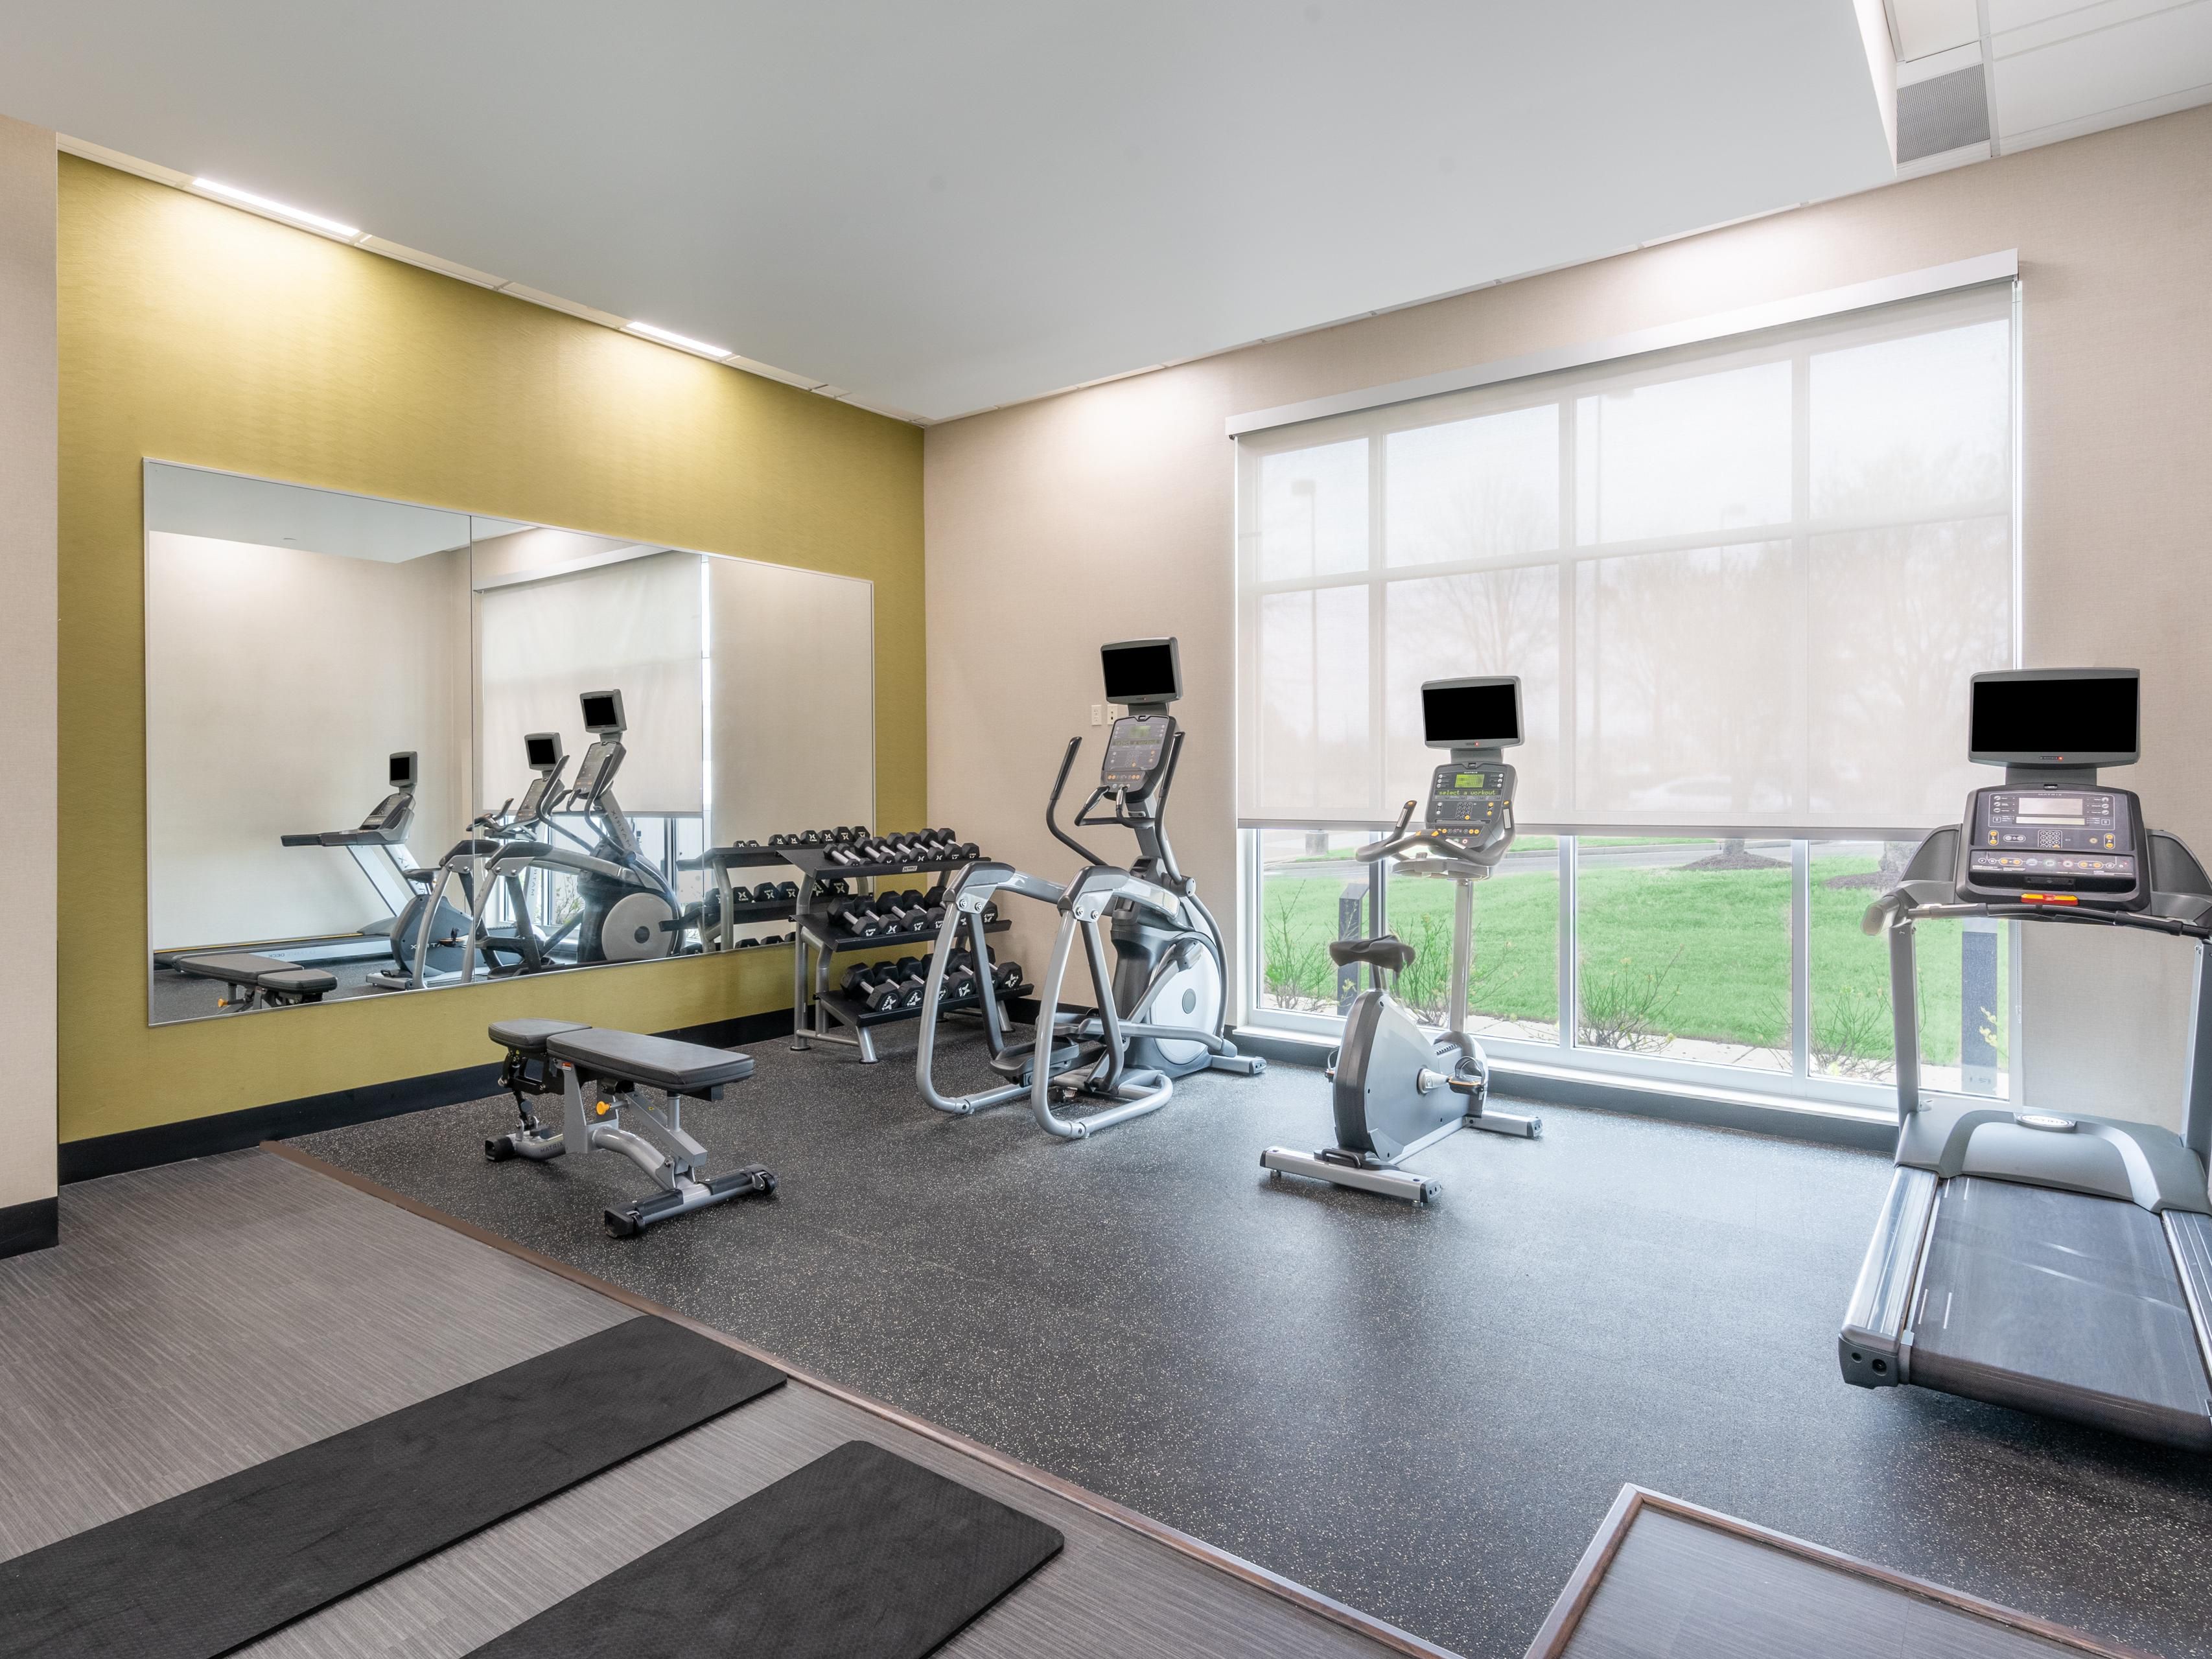 Workout at our fitness center to stay on track with your fitness goals! Our equipment includes treadmill, elliptical machines, free weights and stationary bicycle.